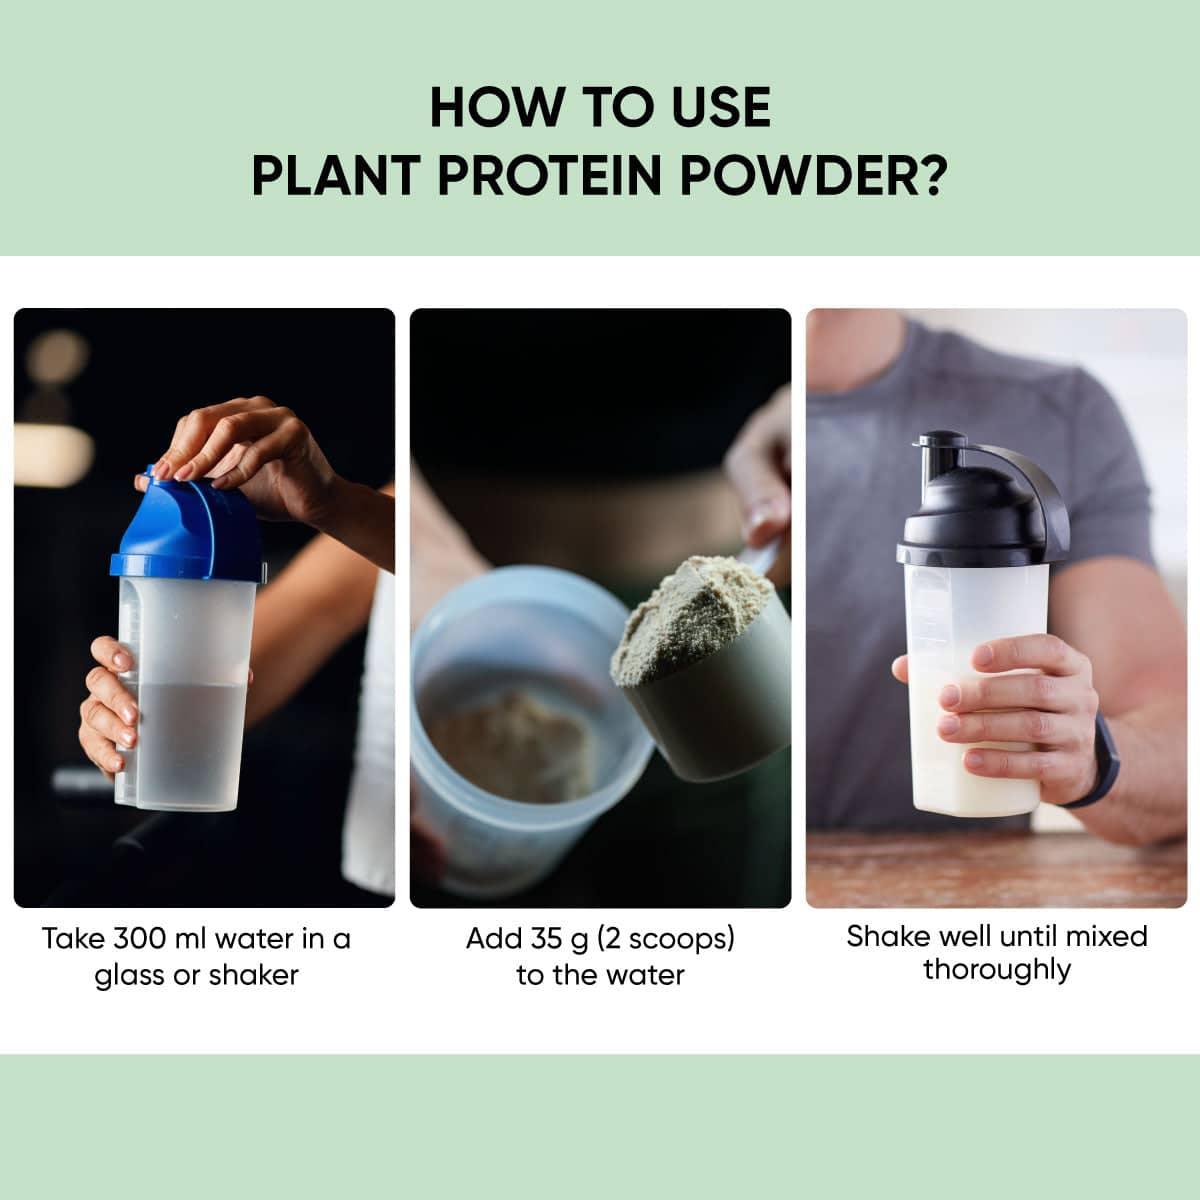 Plant Protein Powder: First-Ever Plant Protein Enriched With Methi, Ashwagandha and Ajwain - Herbobuild